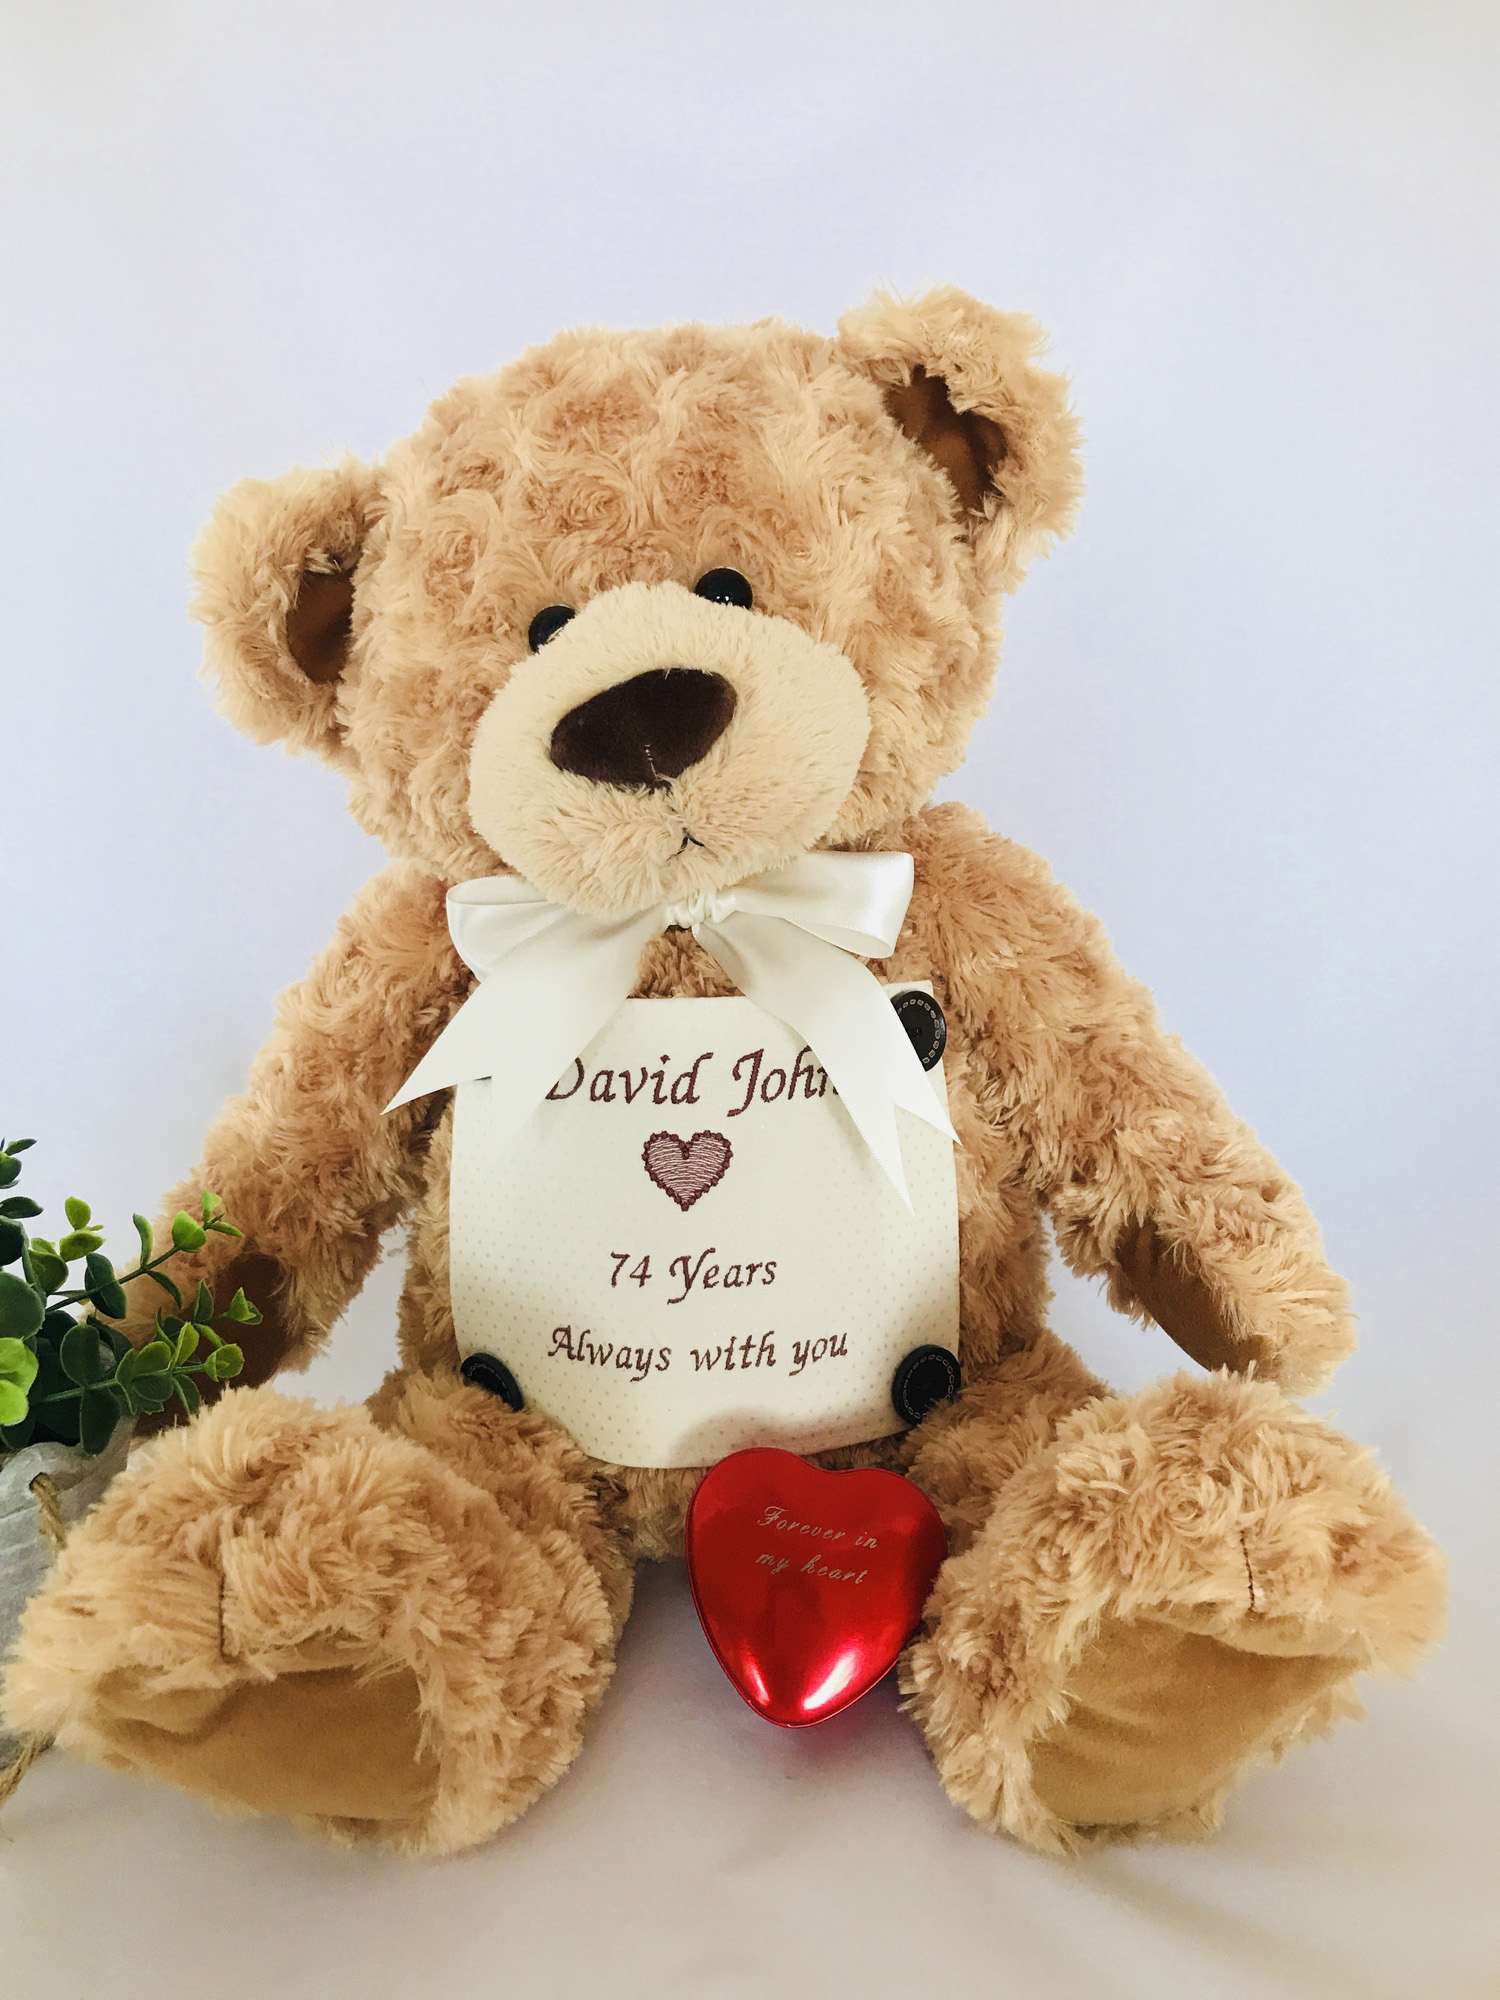 Extra large, soft and cuddly, this bear is the perfect teddy bear urn